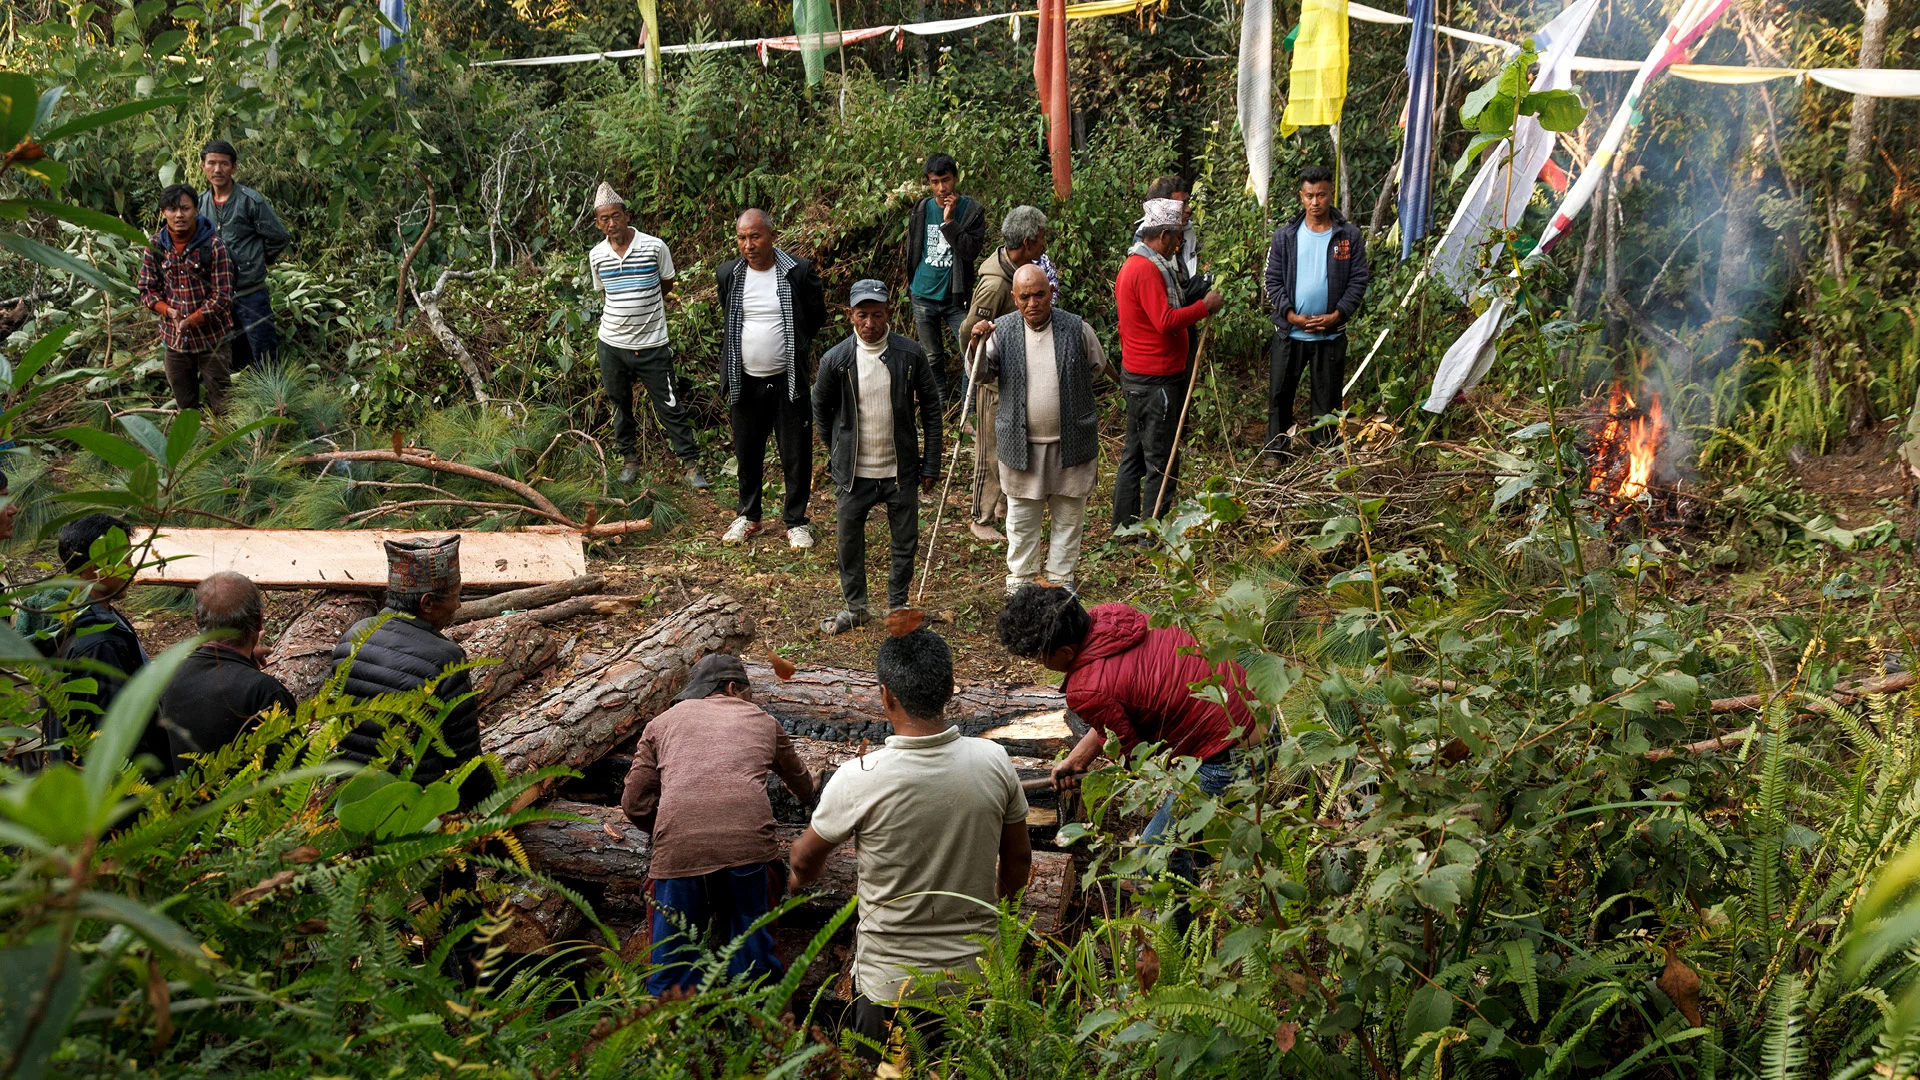 Men preparing a pire for a cremation in a remote nepalese village